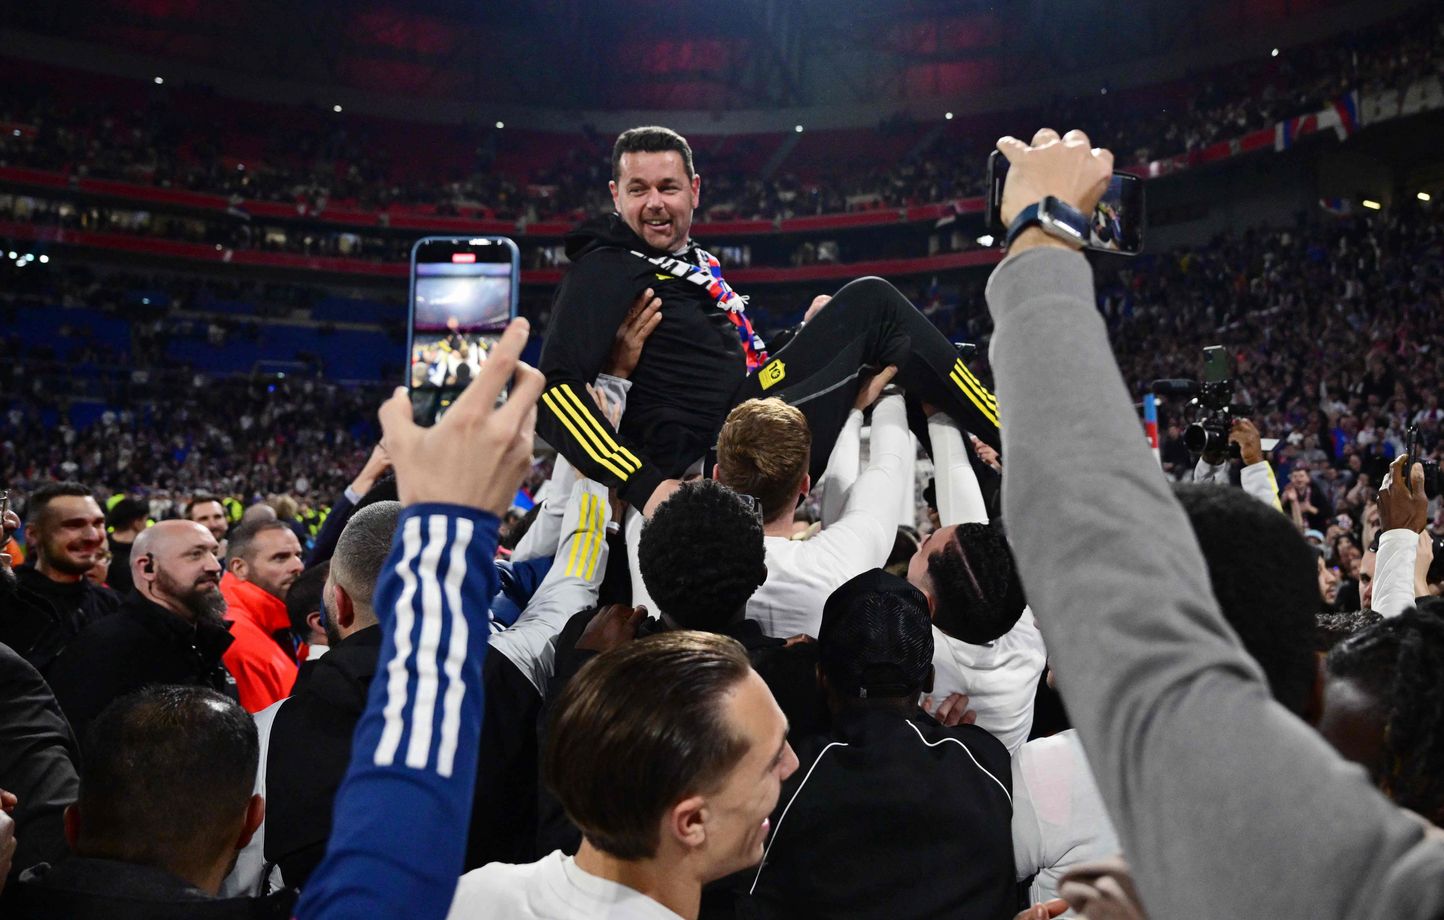 Pierre Sage was carried in triumph by his players on Tuesday evening after qualifying for the Coupe de France final.